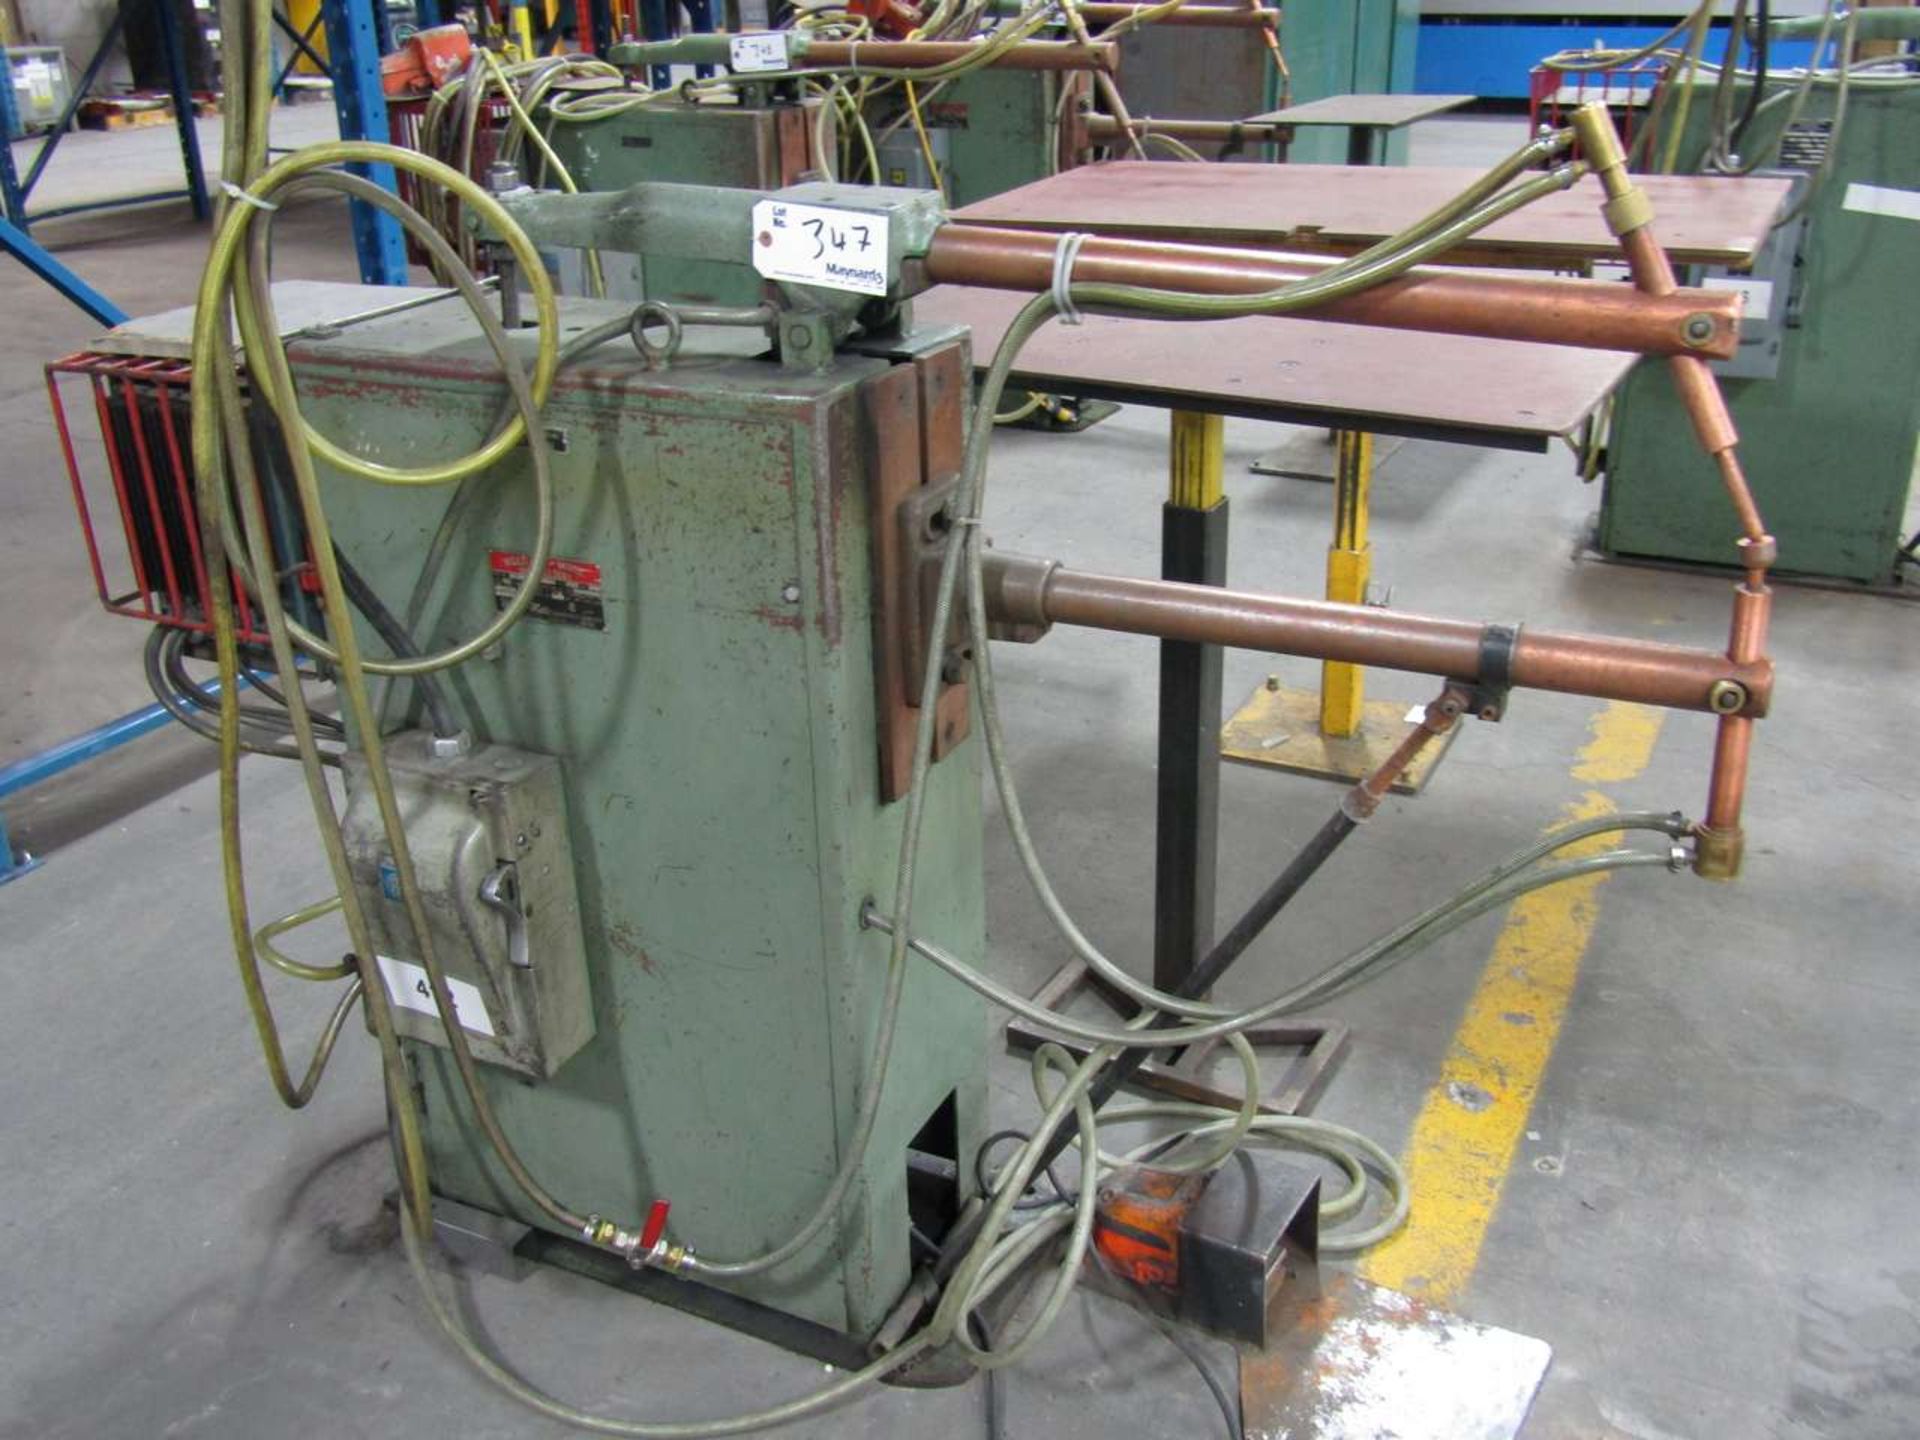 Weld-O-Matic AF Spot Welder with table